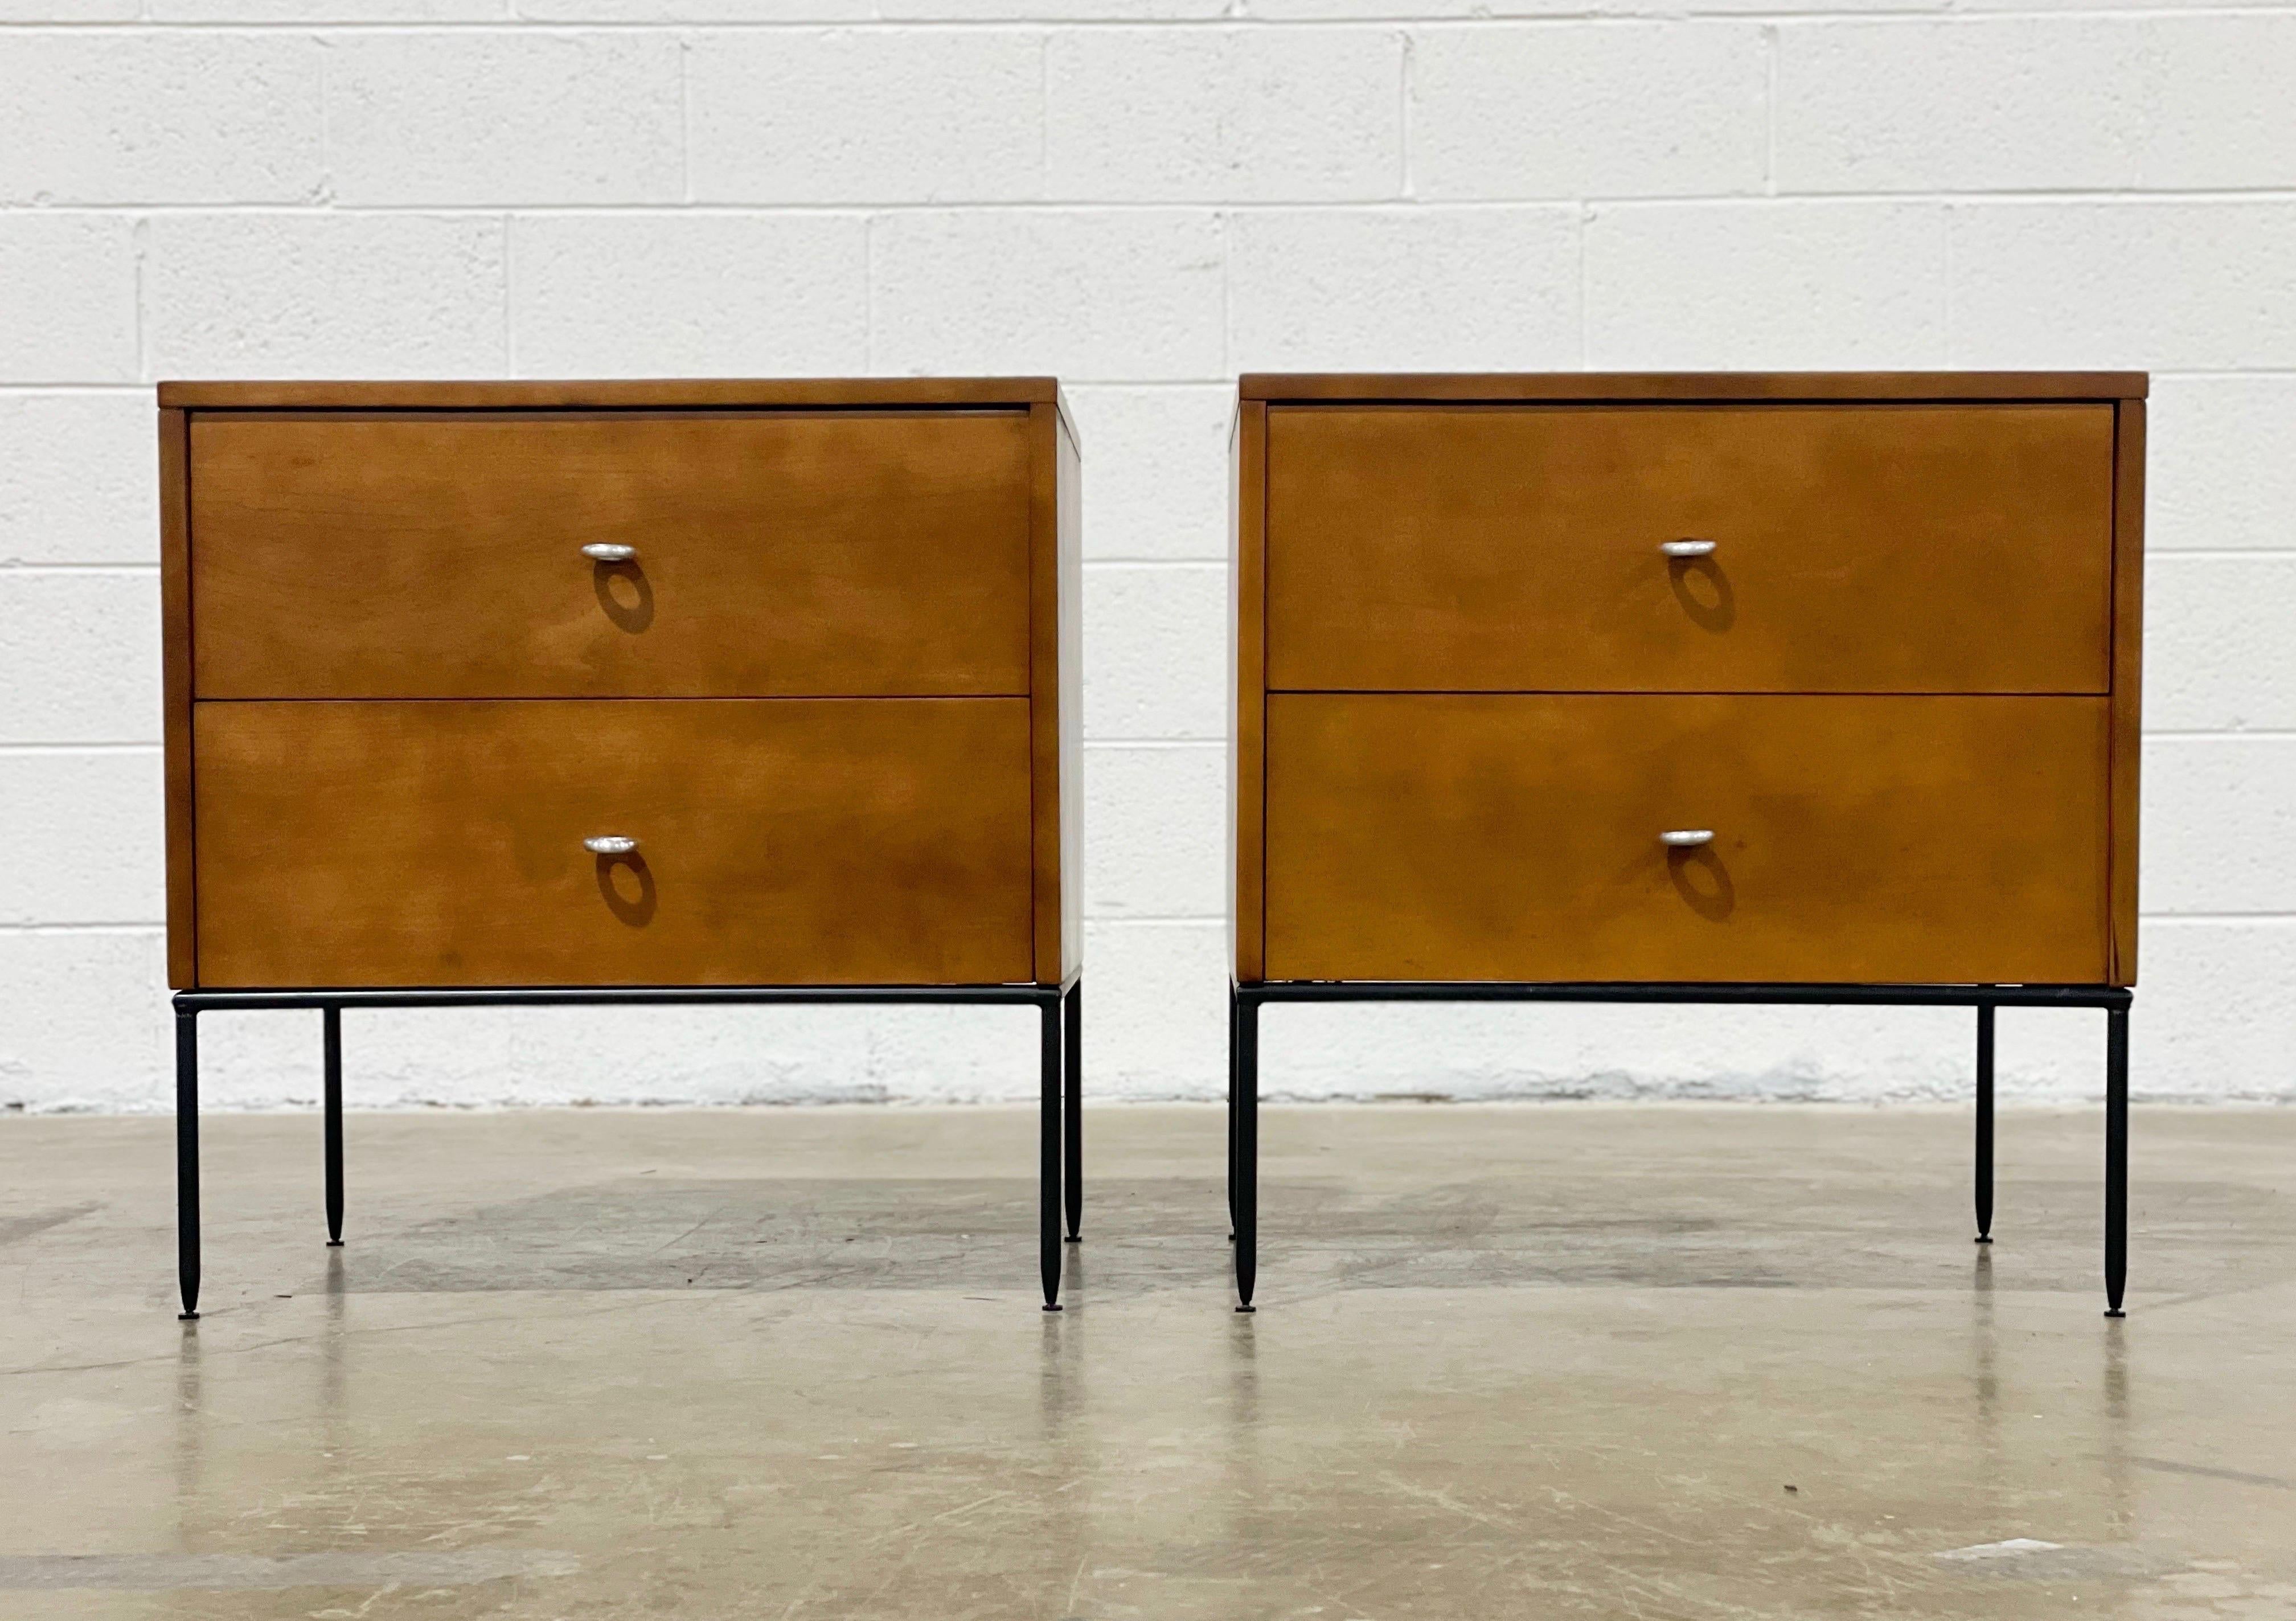 Stellar pair of American modern two drawer Planner Group nightstands by Paul McCobb for Winchendon.
- Model #1503
- Tobacco finish
- Wrought Iron bases with adjustable feet
- Large O-Ring pulls

Fully restored by our team of in-house